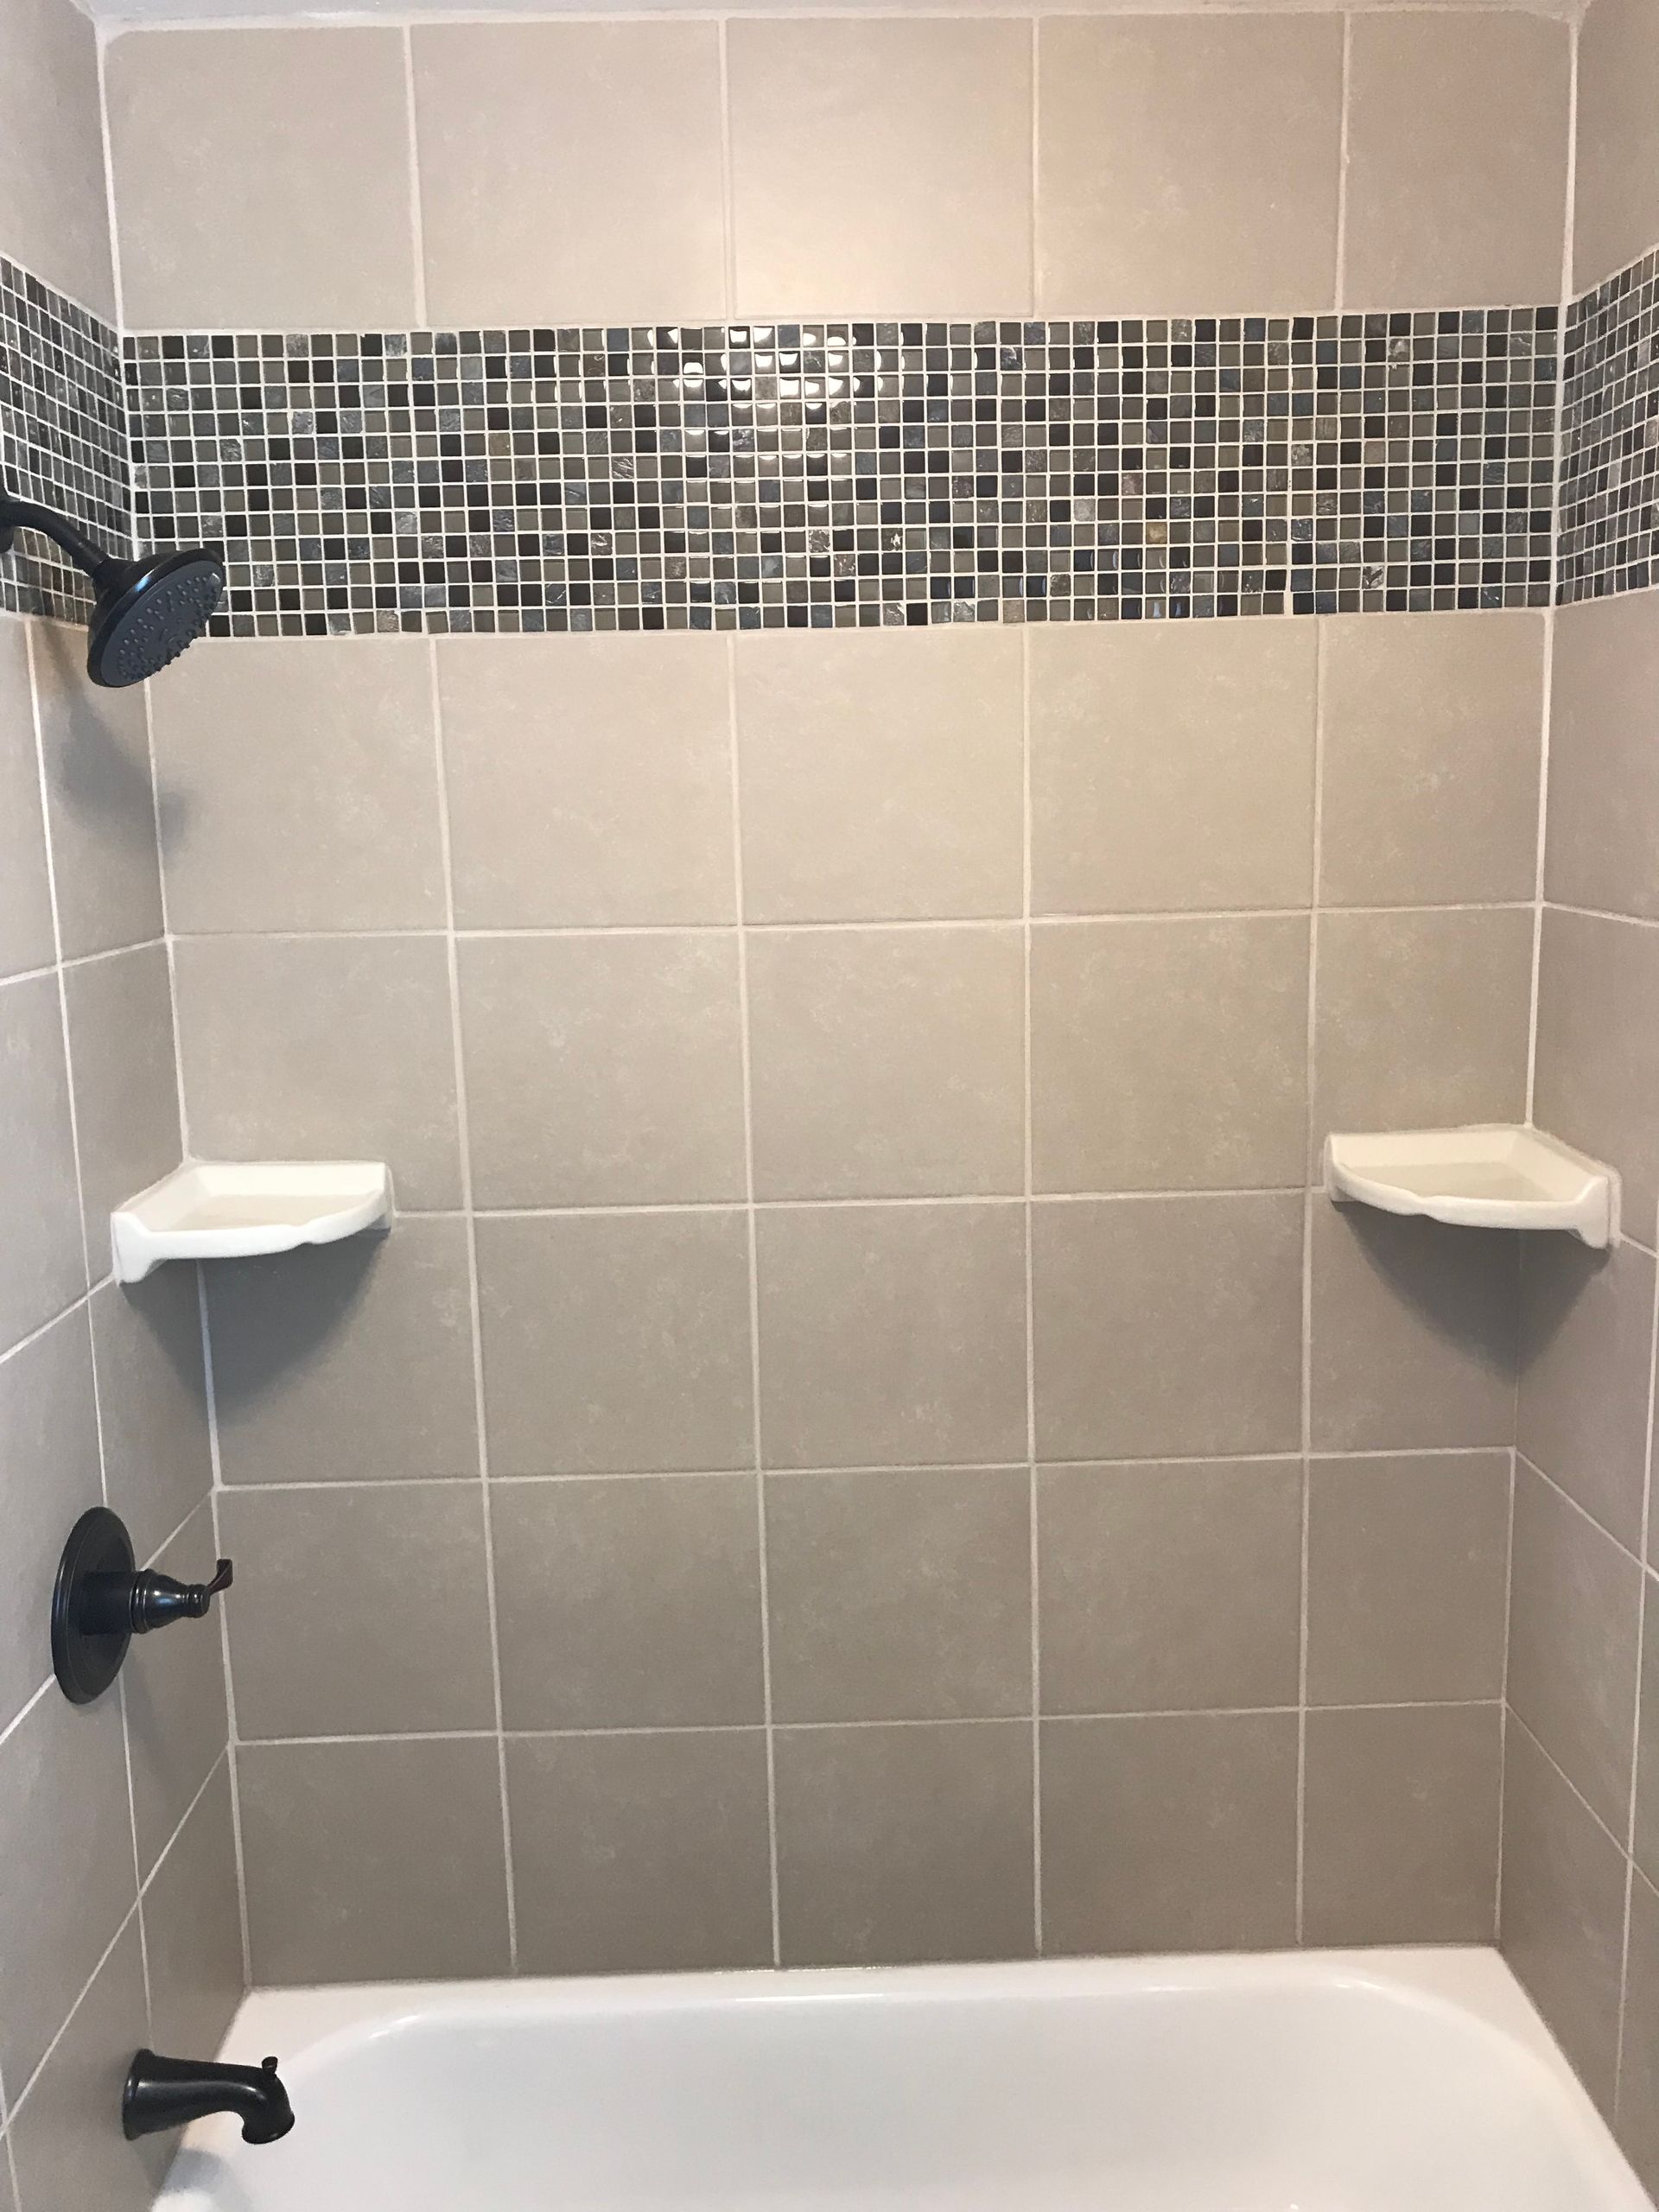 A bathtub in a bathroom with a shower and shelves